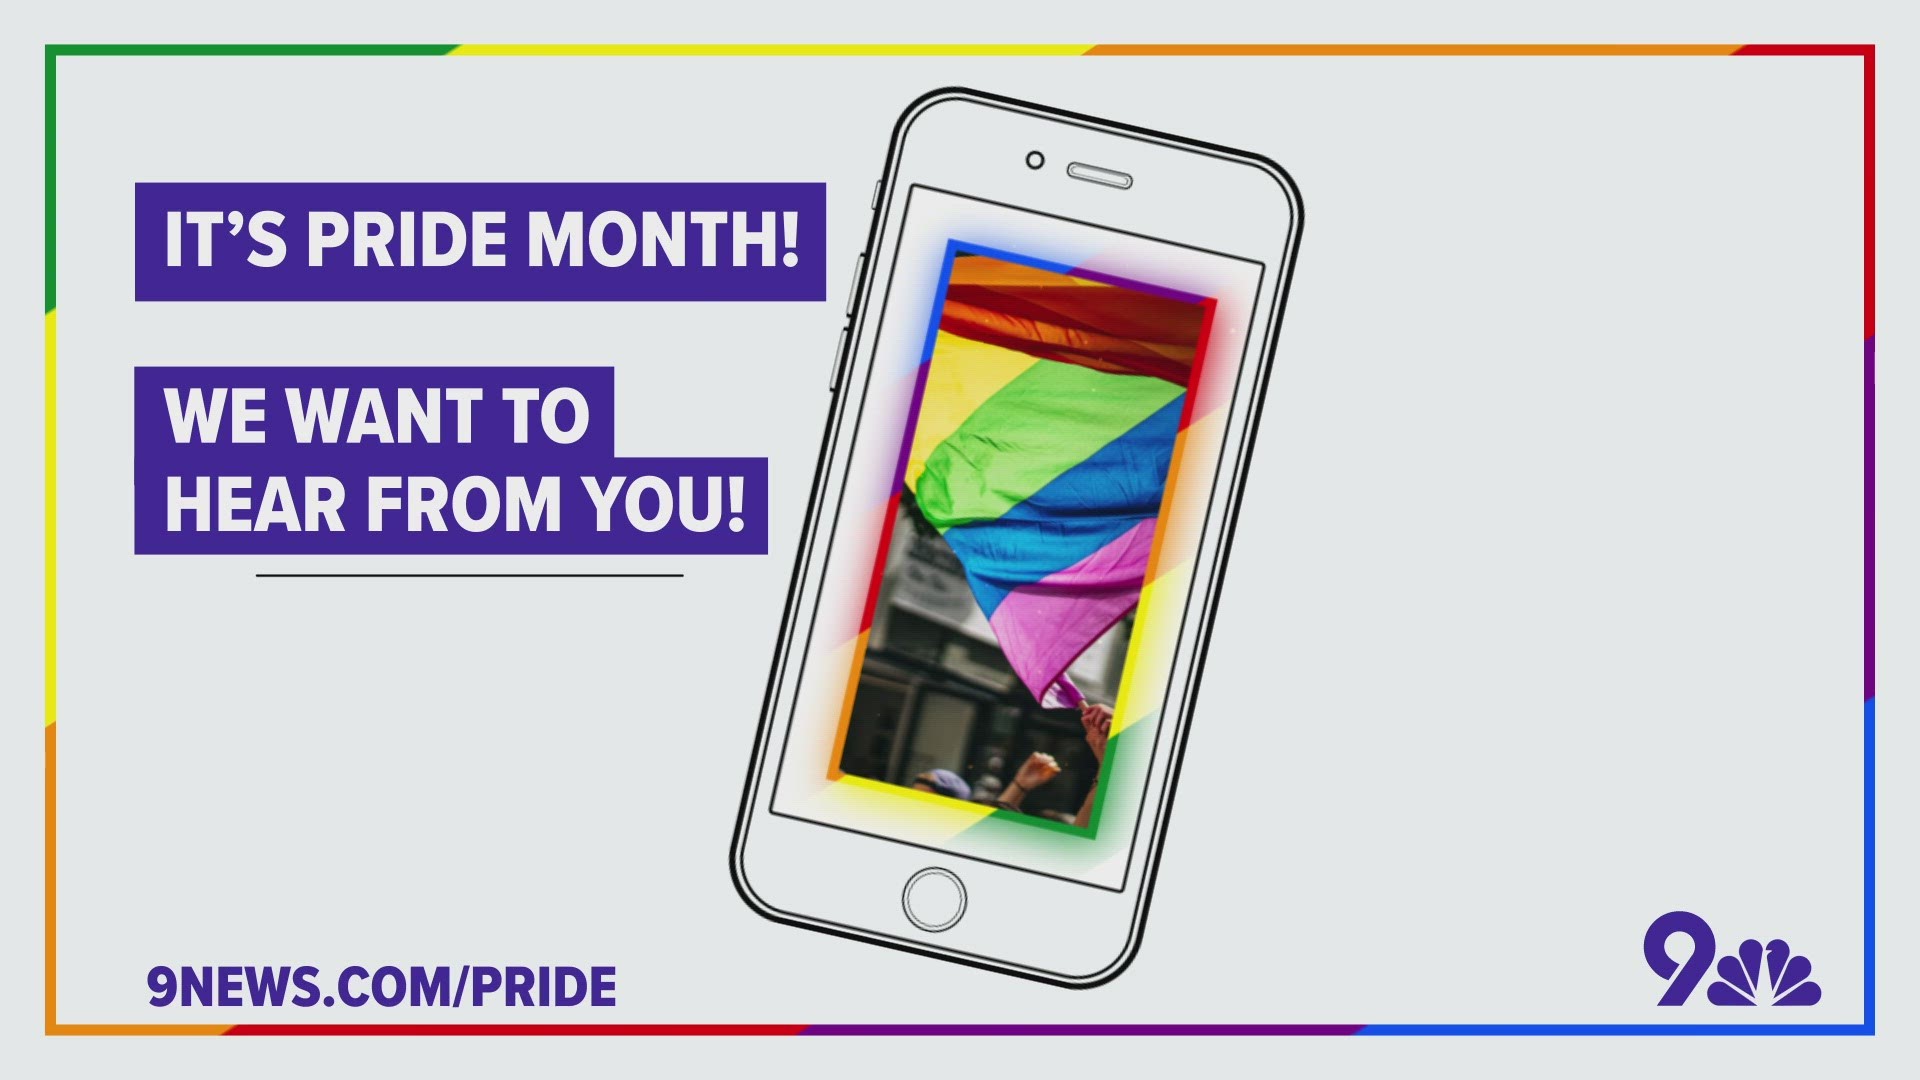 9NEWS wants to give you the chance to voice your support and wish our Colorado community a happy Pride Month.